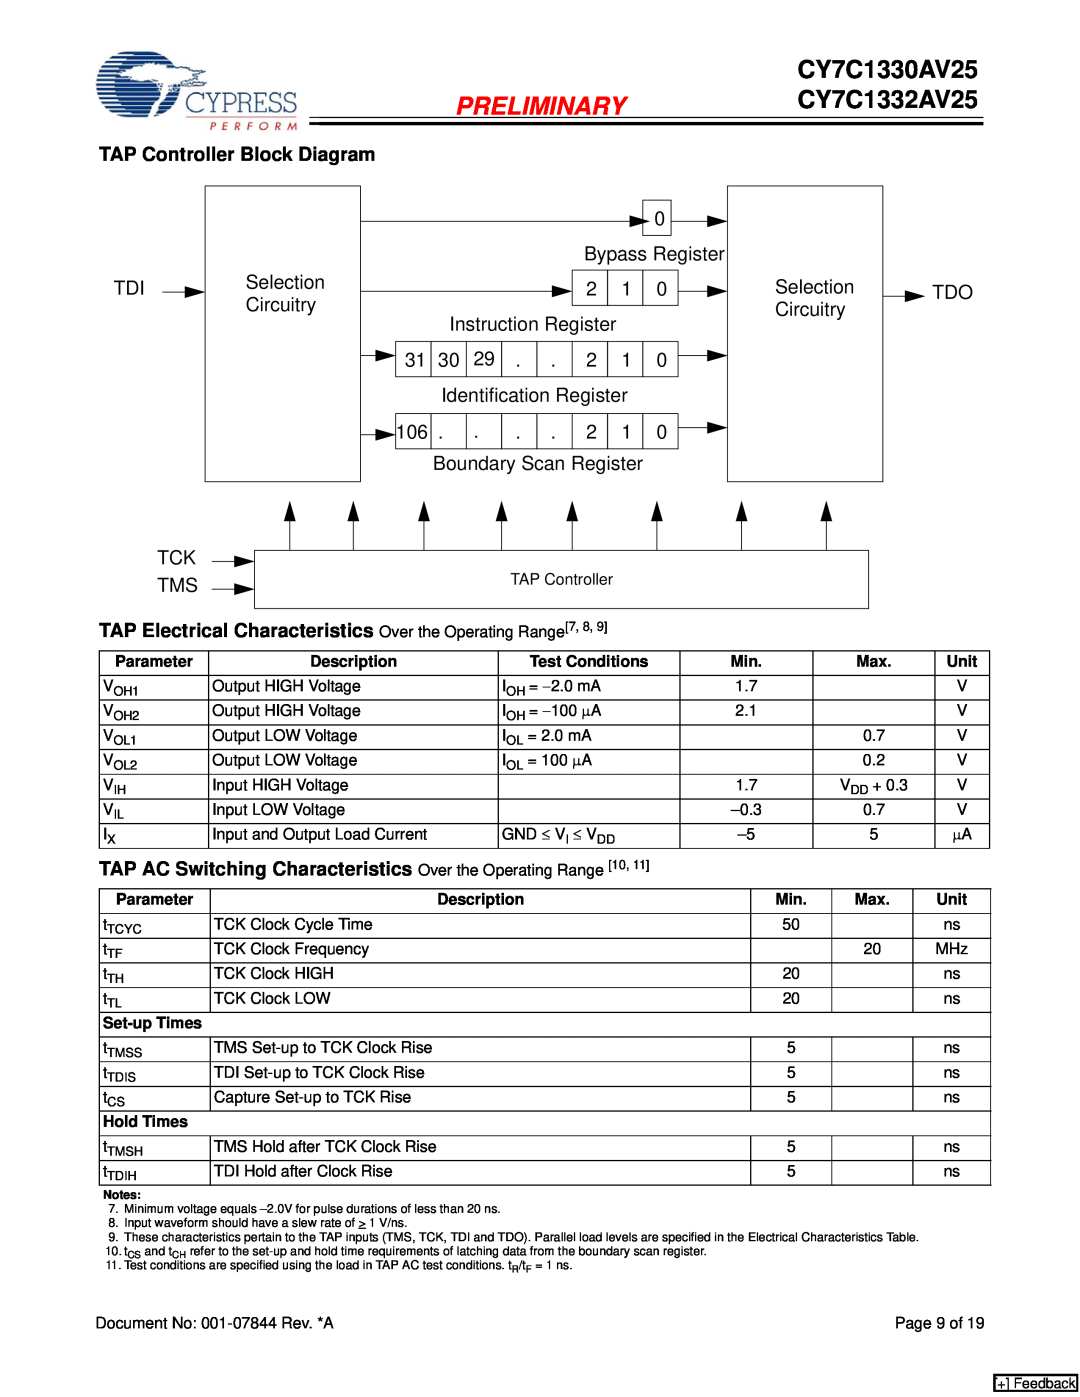 Cypress CY7C1332AV25 manual TAP Controller Block Diagram, TAP Electrical Characteristics Over the Operating Range7, 8 